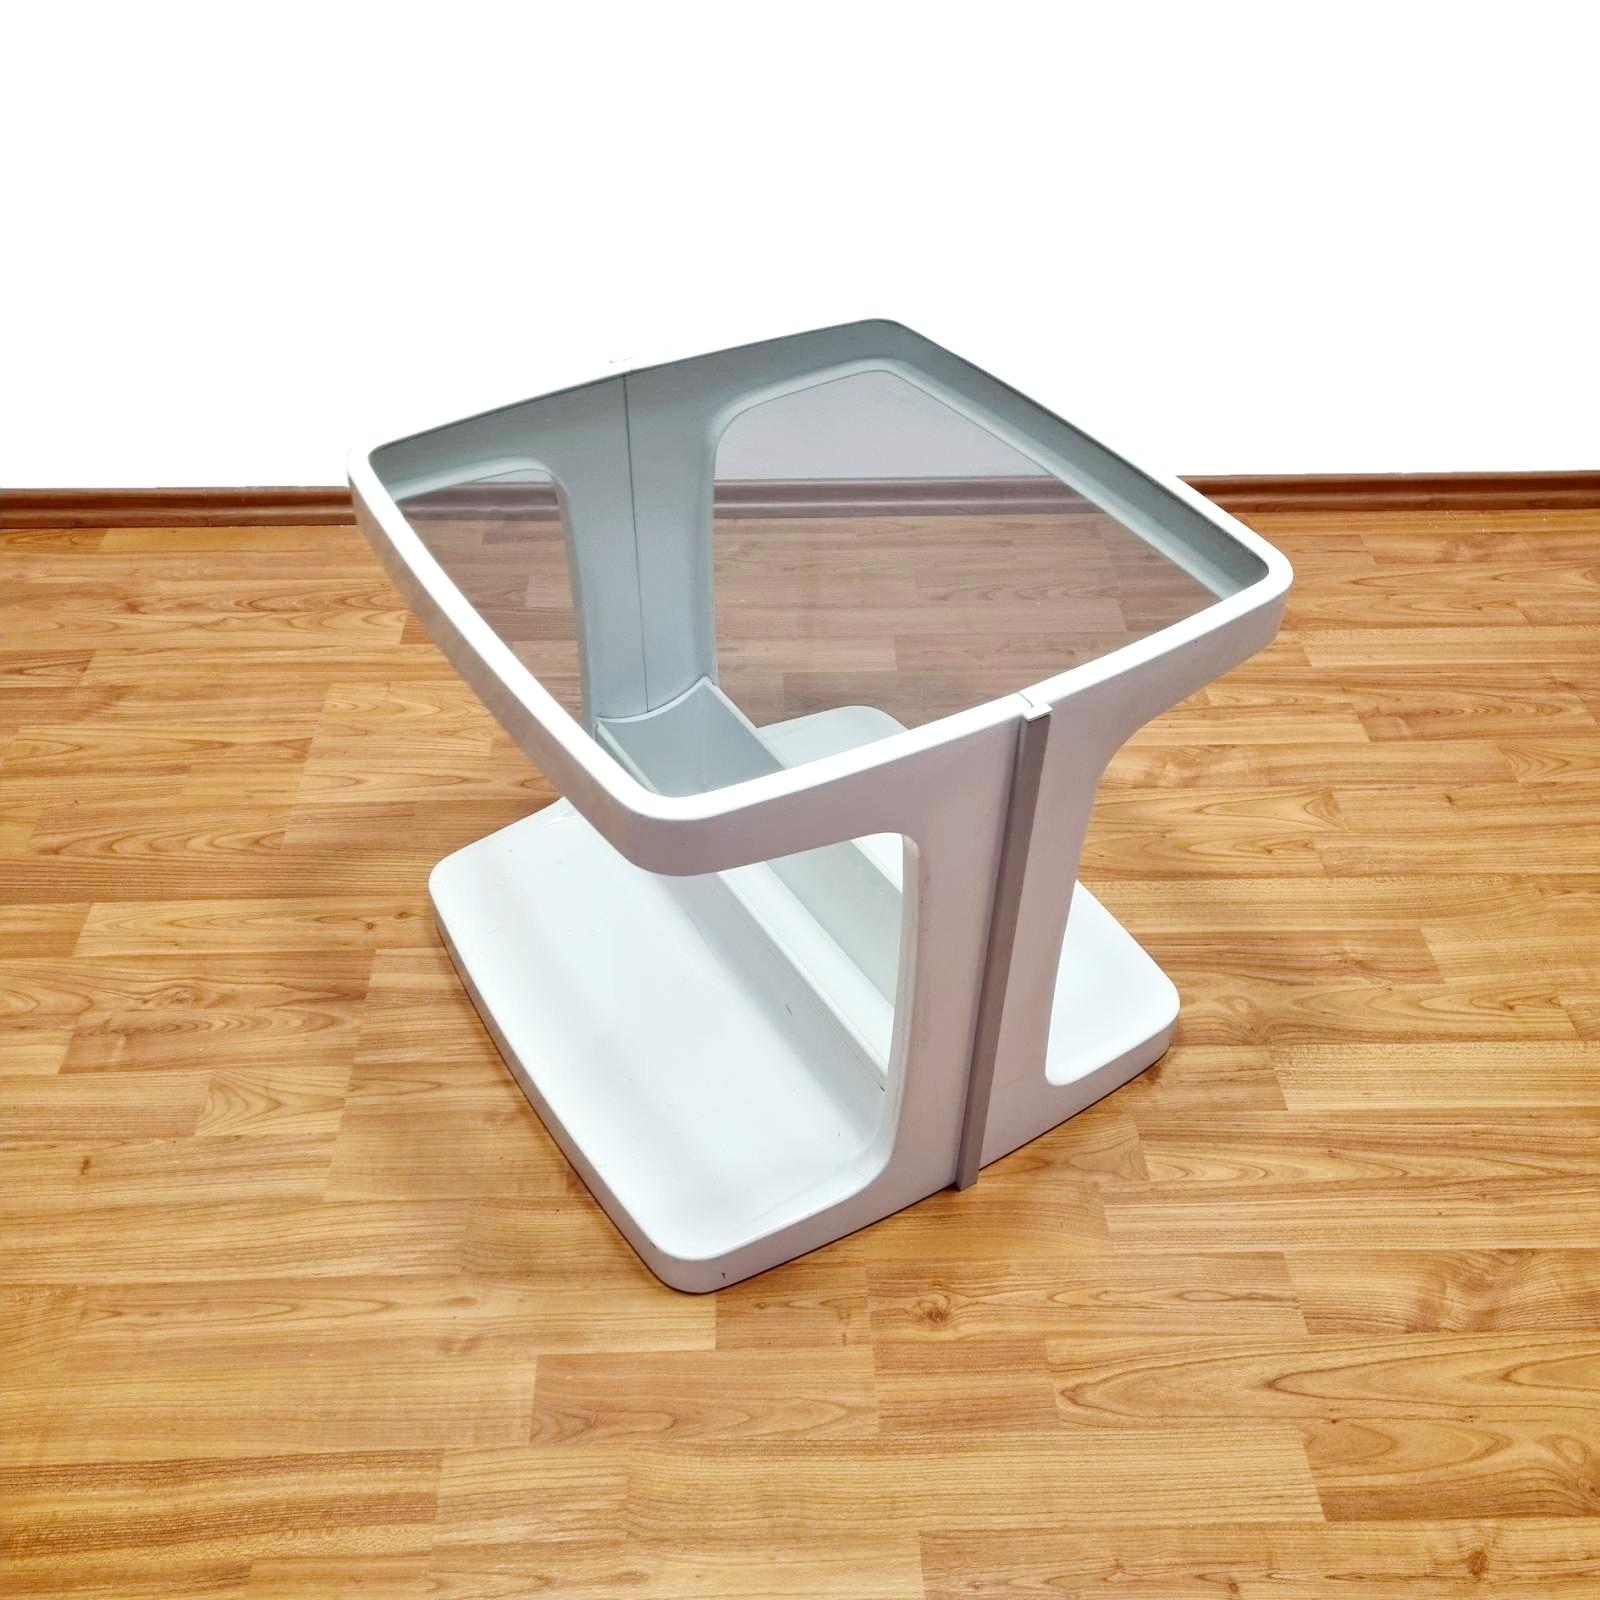 Nice coffee table designed by Marc Held for Prisunic
Classic space age design
It can be use as coffee table, side table or coctail table